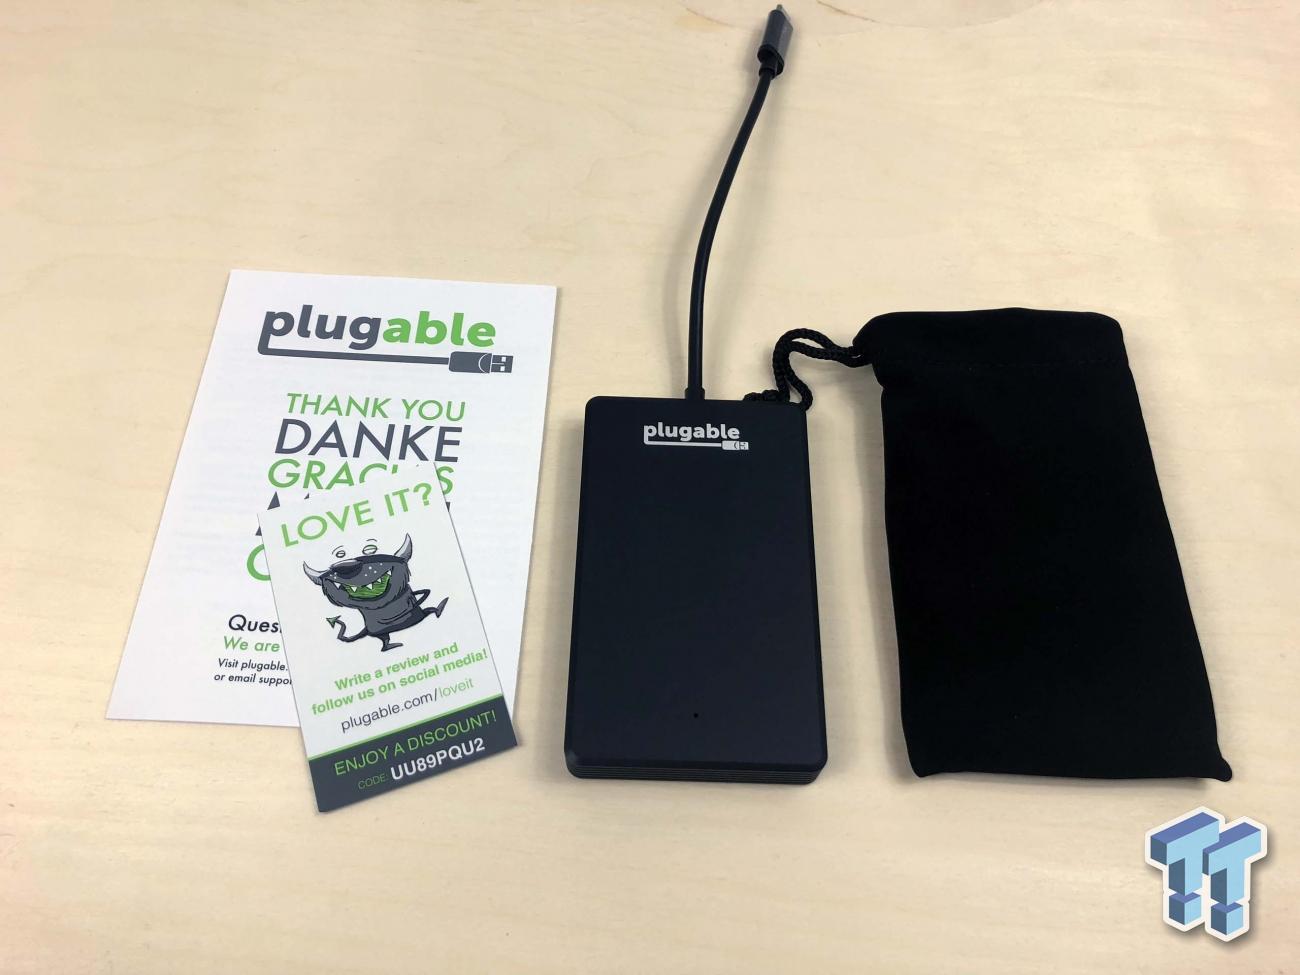 Plugable Thunderbolt 3 NVMe External SSD Review: Extreme Speed